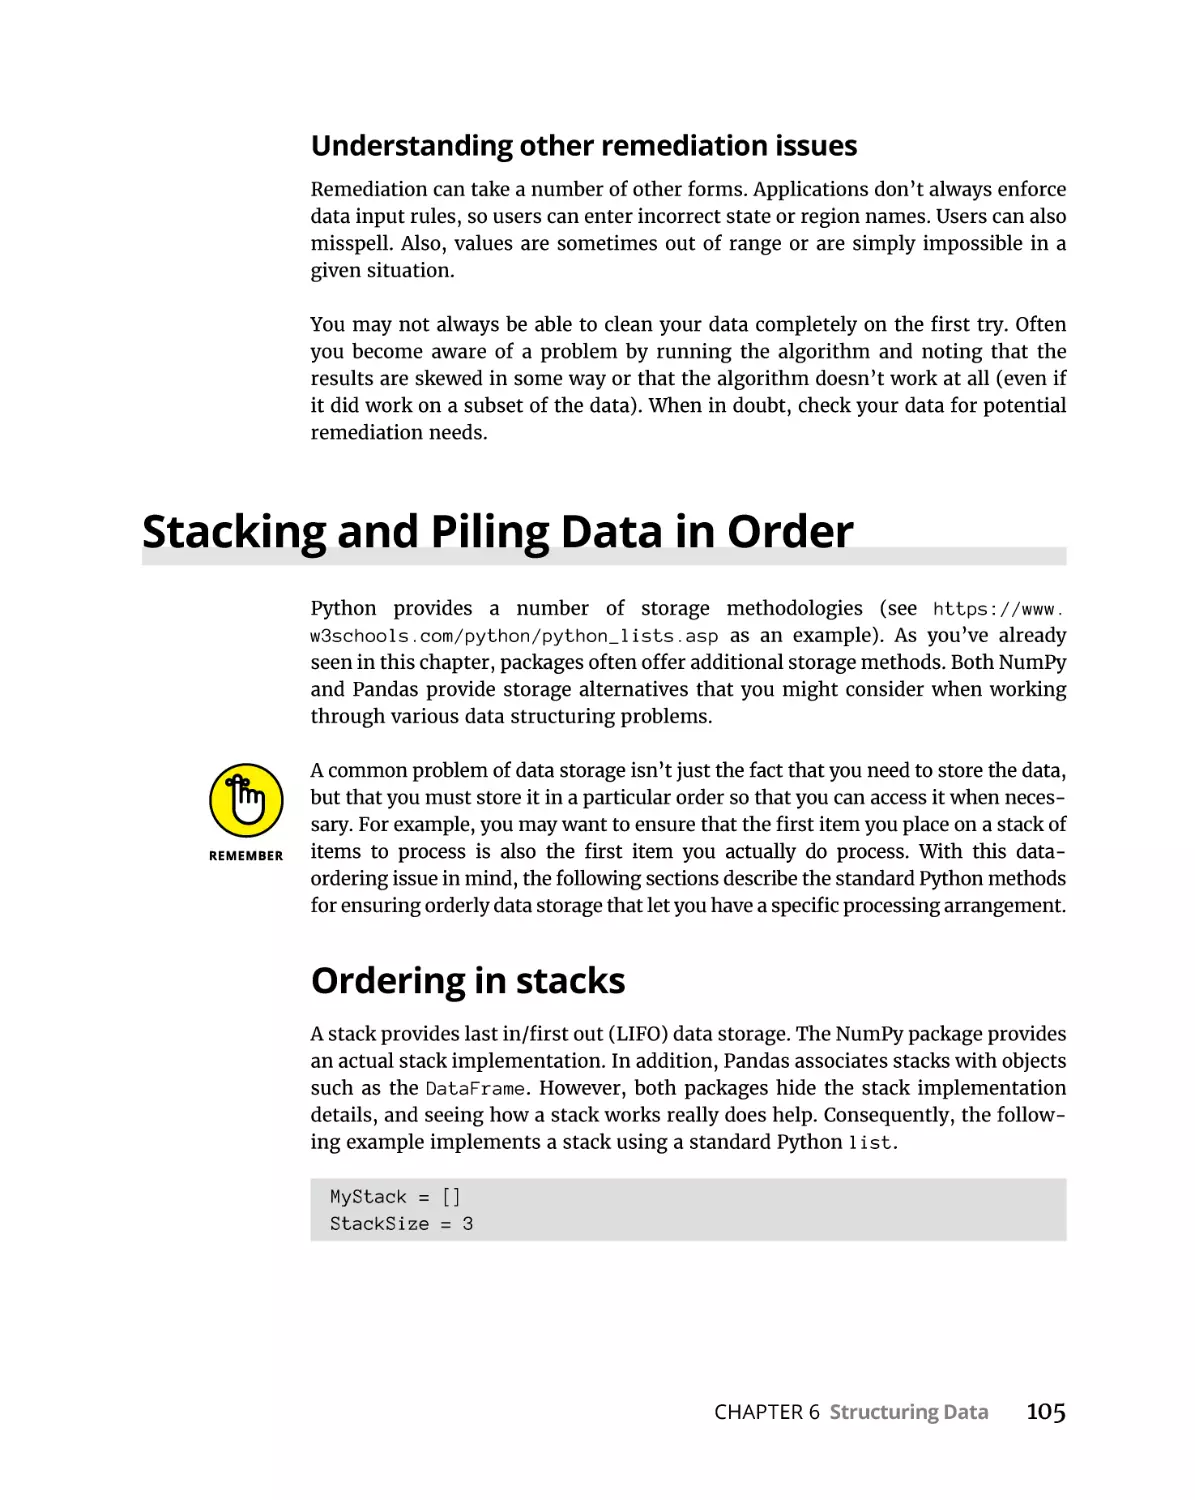 Stacking and Piling Data in Order
Ordering in stacks